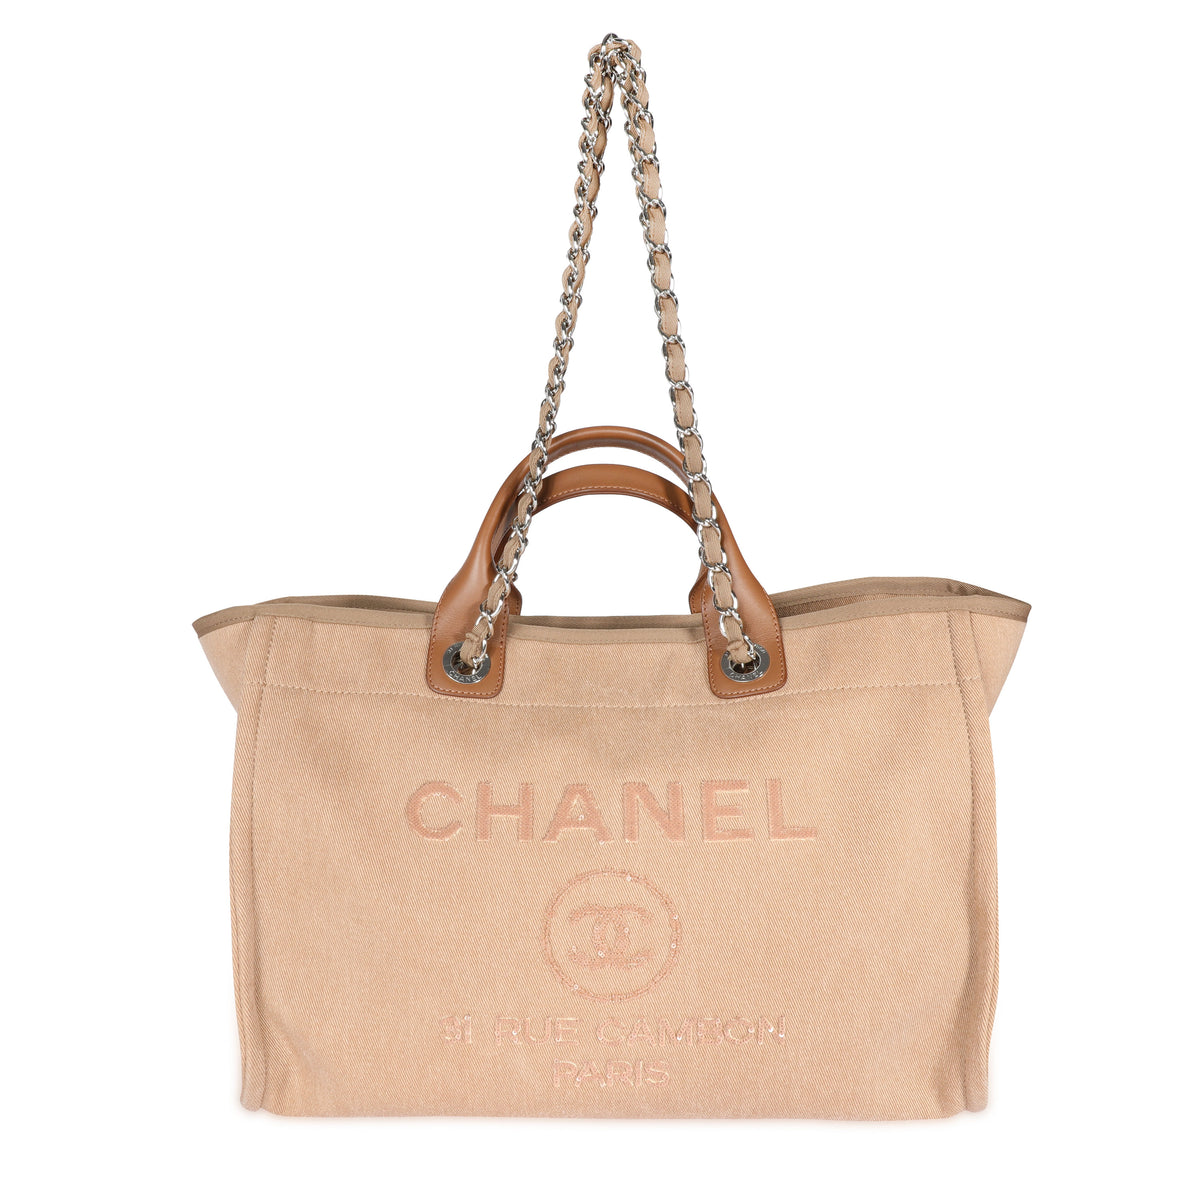 Chanel Deauville Large, Beige Wool with White Leather and Silver Hardware